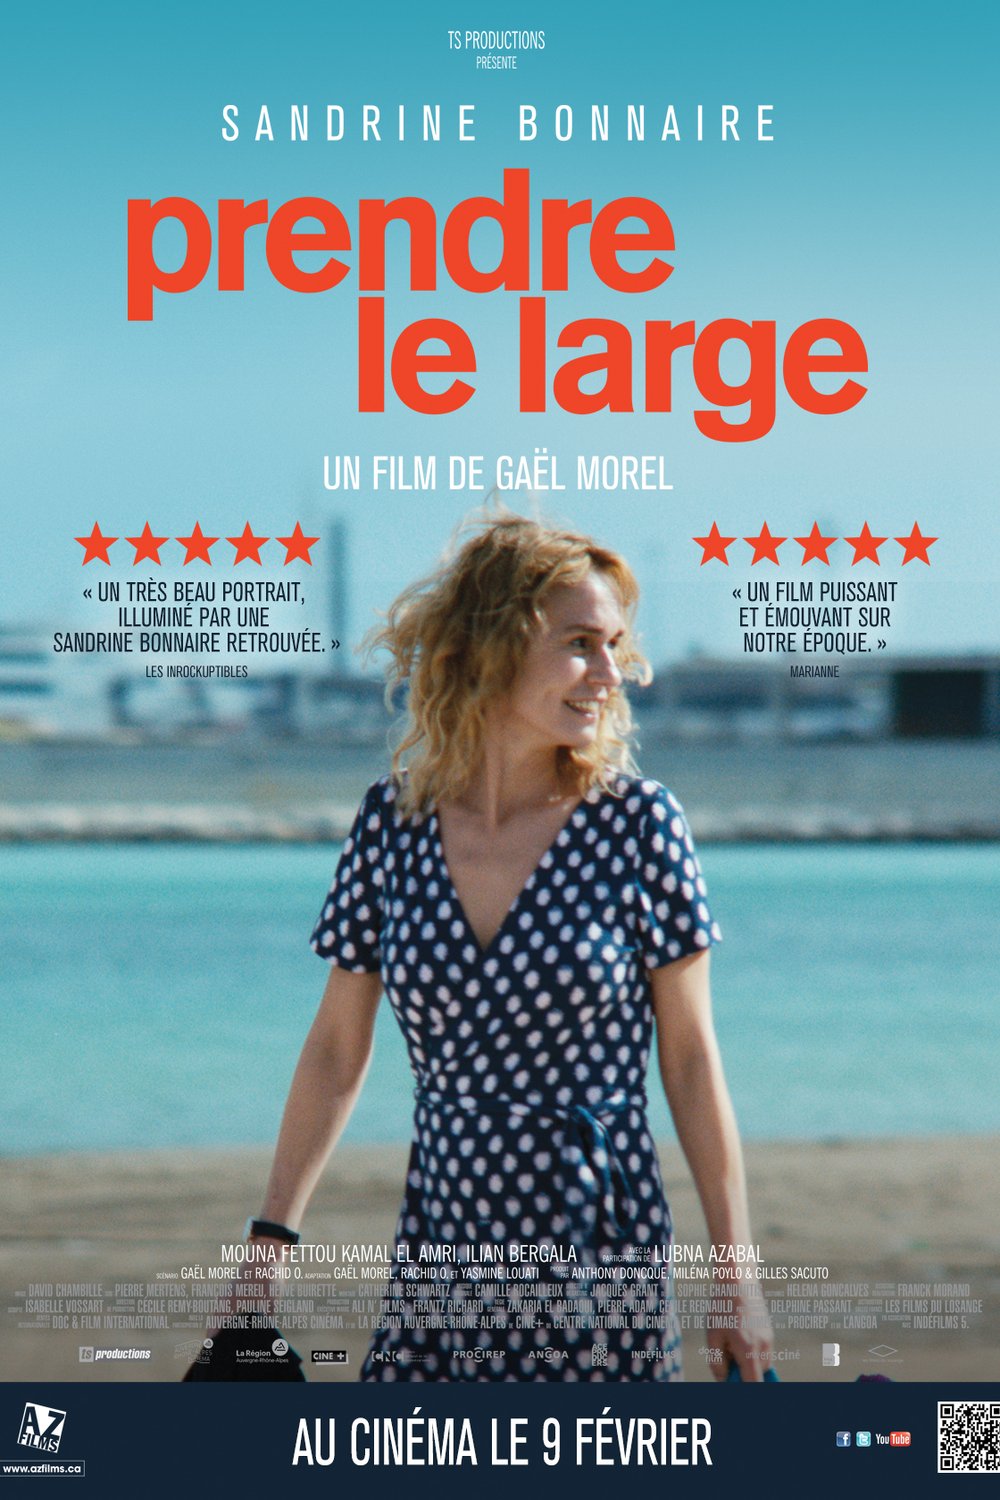 Poster of the movie Prendre le large